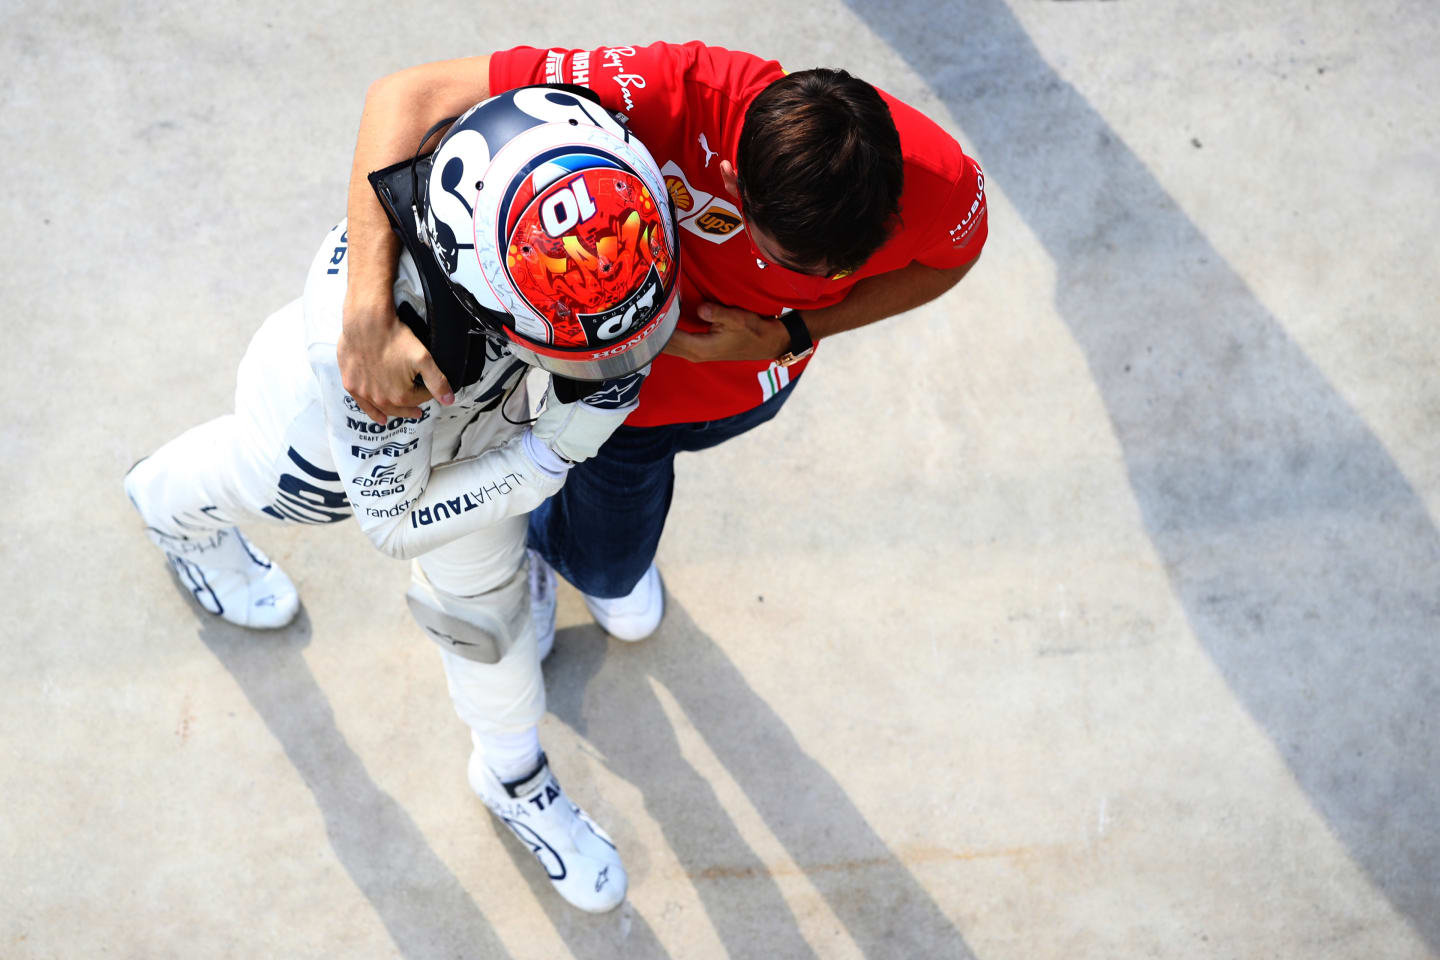 MONZA, ITALY - SEPTEMBER 06: Race winner Pierre Gasly of France and Scuderia AlphaTauri celebrates with Charles Leclerc of Monaco and Ferrari in parc ferme during the F1 Grand Prix of Italy at Autodromo di Monza on September 06, 2020 in Monza, Italy. (Photo by Mark Thompson/Getty Images)